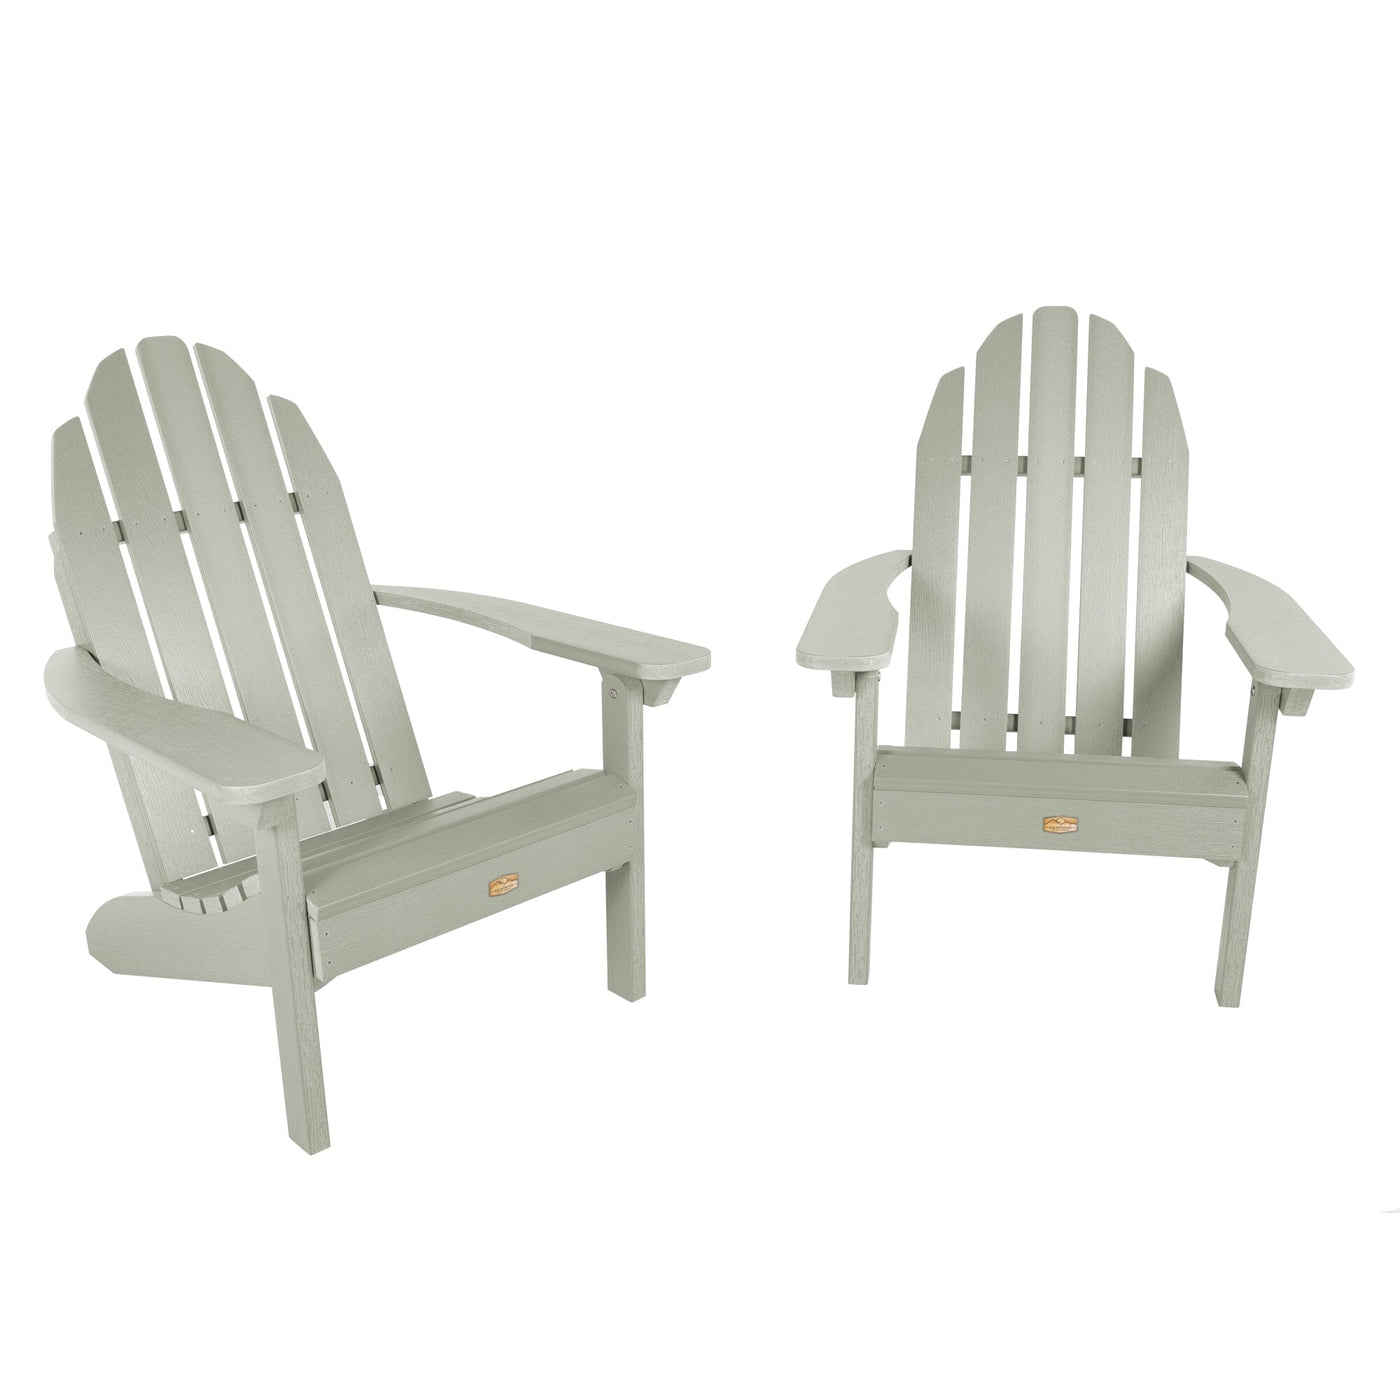 Set of 2 Essential Adirondack Chairs Kitted Sets ELK OUTDOORS® Eucalyptus 